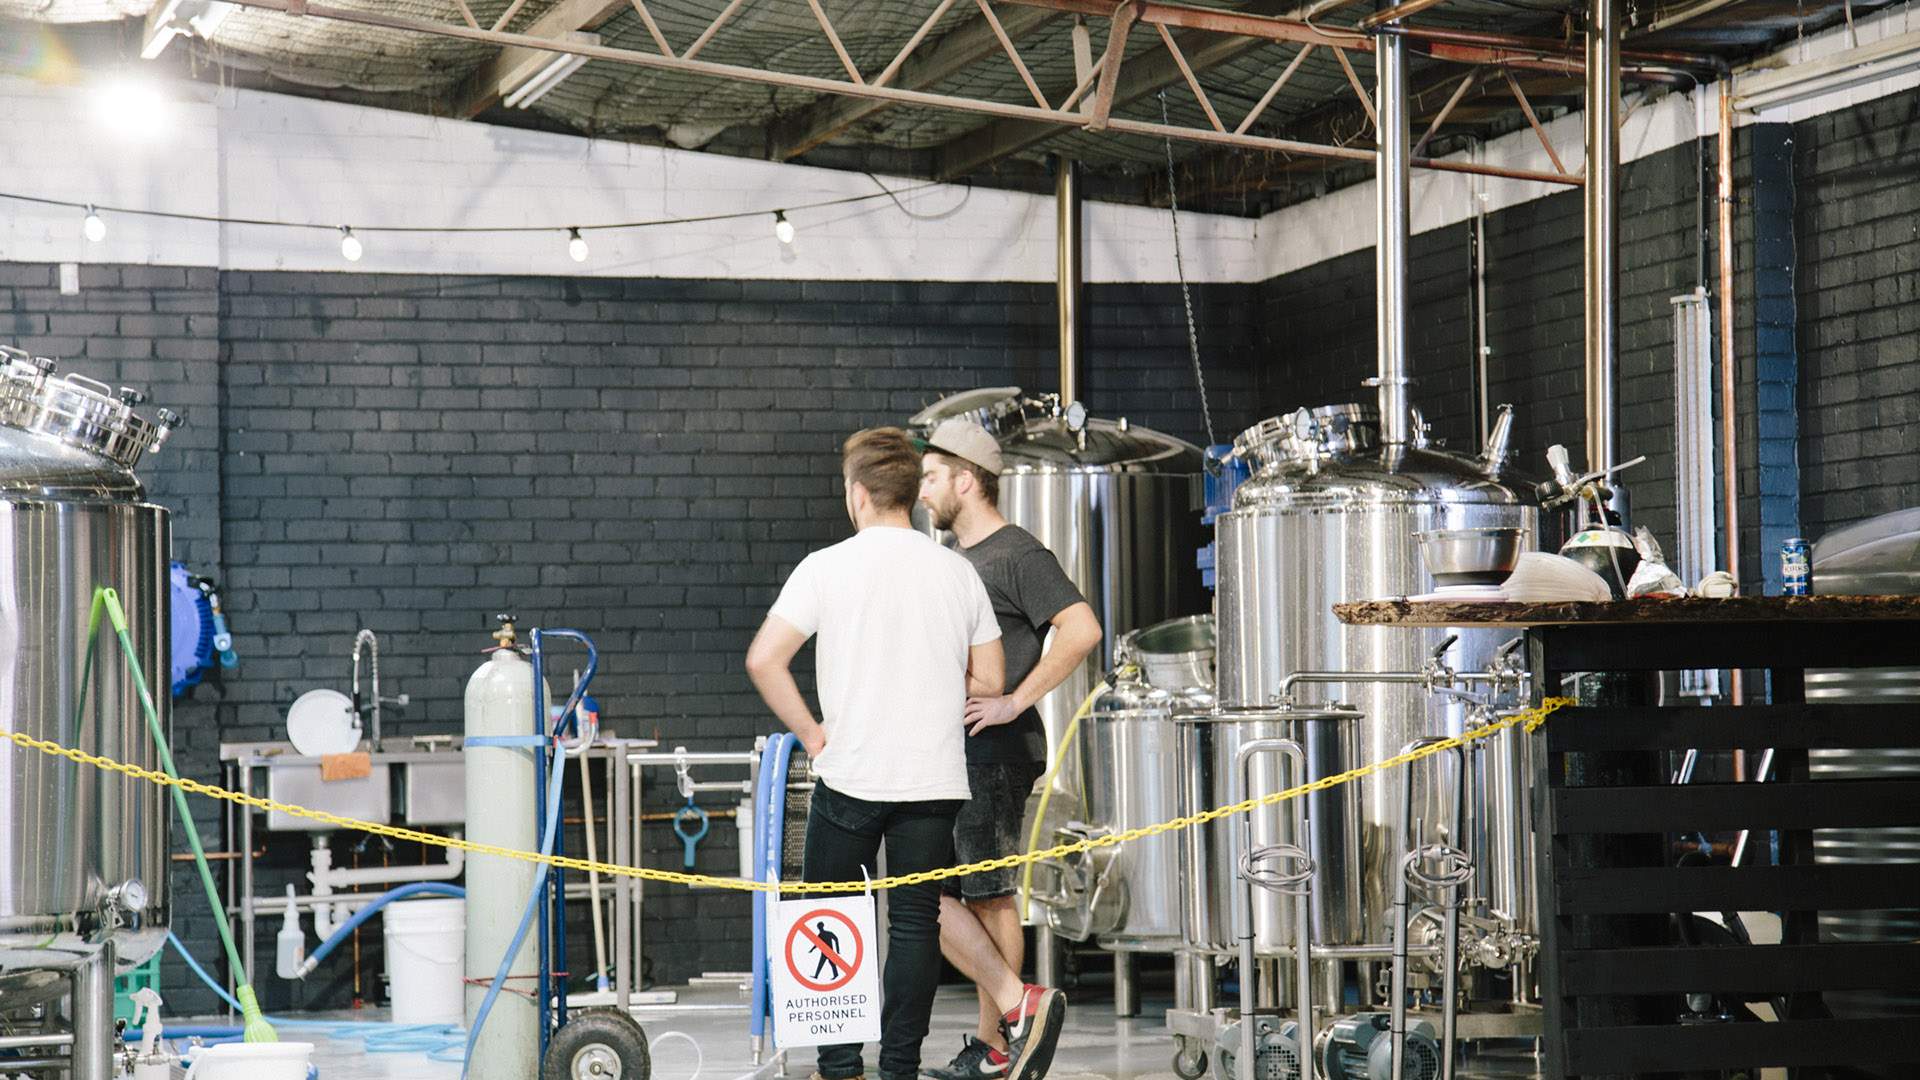 The Mill Is Collingwood's New Small-Scale Brewery and Taproom